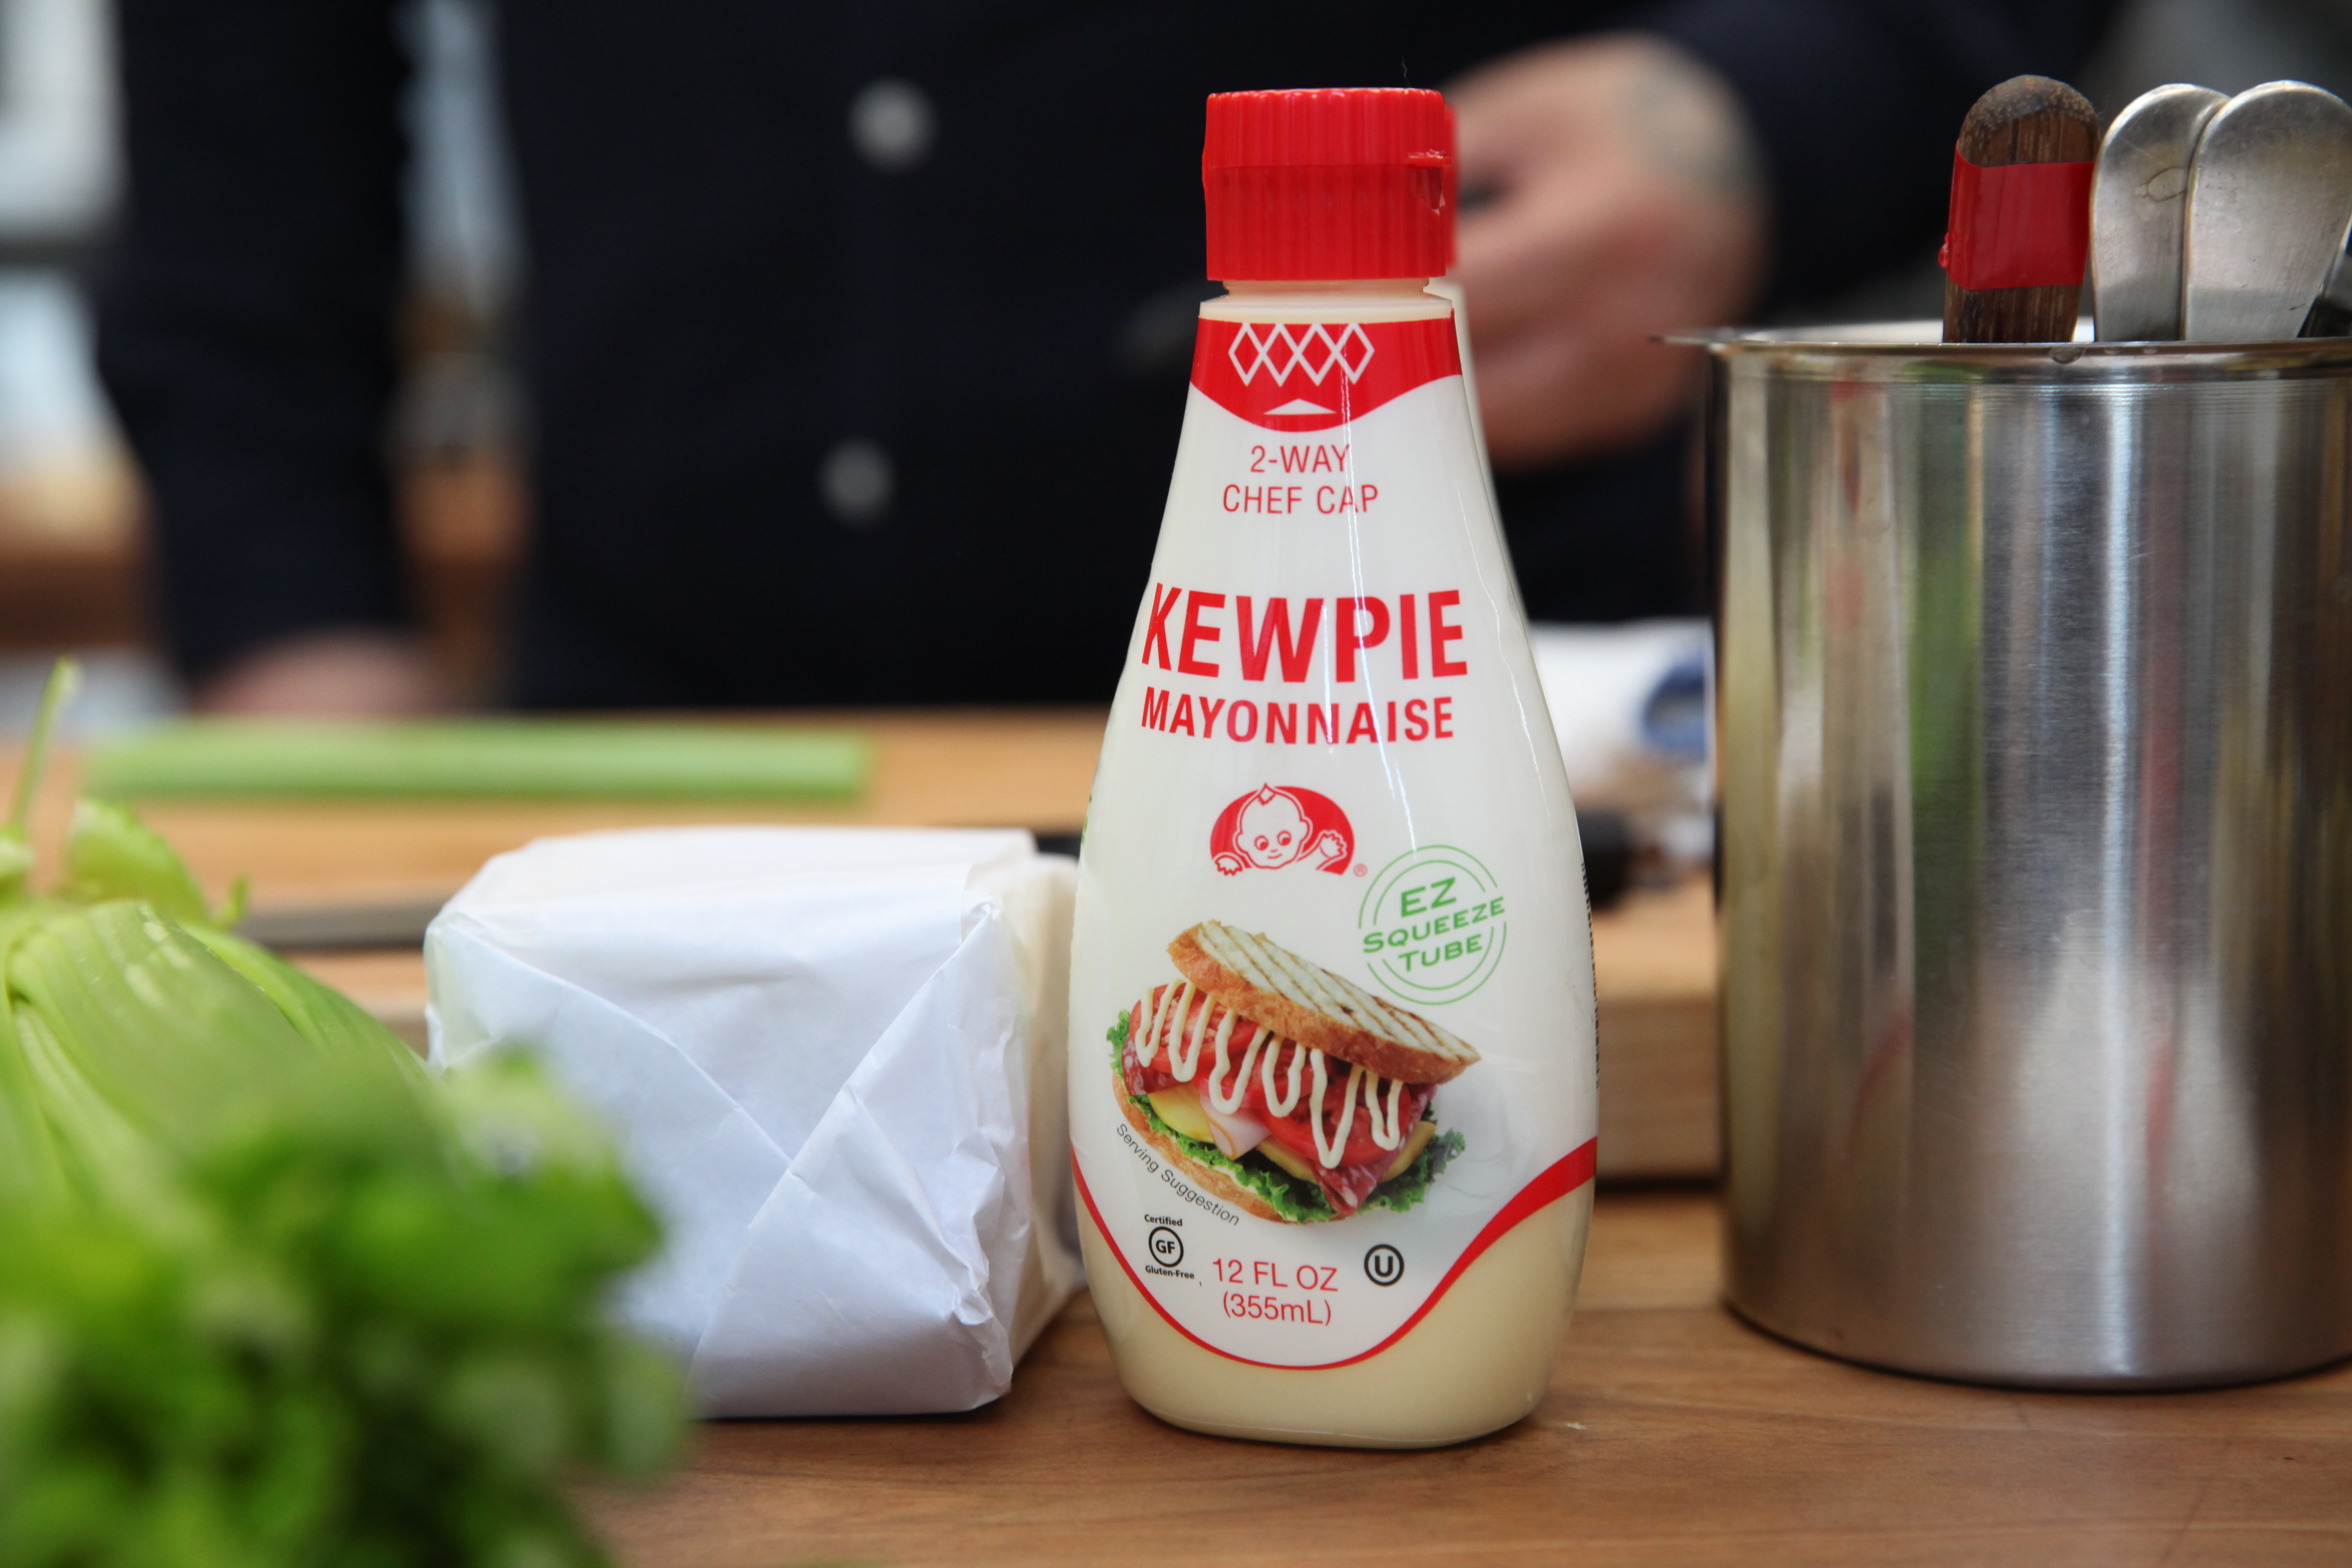 a squeeze bottle of japanese kewpie mayonnaise next to a paper-wrapped block of cheddar cheese